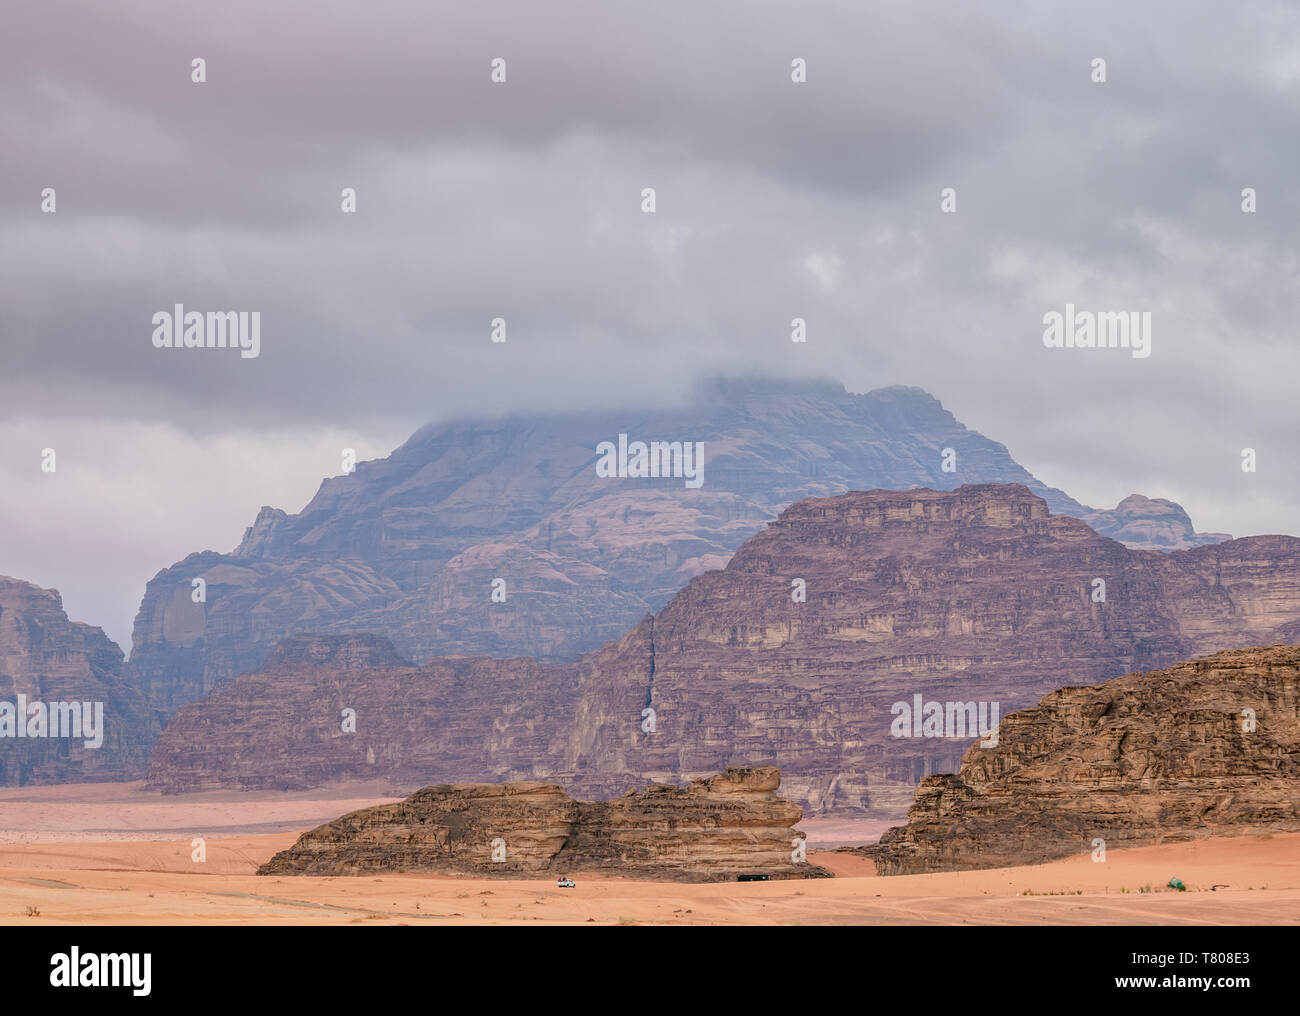 Landscape of Wadi Rum during stormy day, Aqaba Governorate, Jordan, Middle East Stock Photo